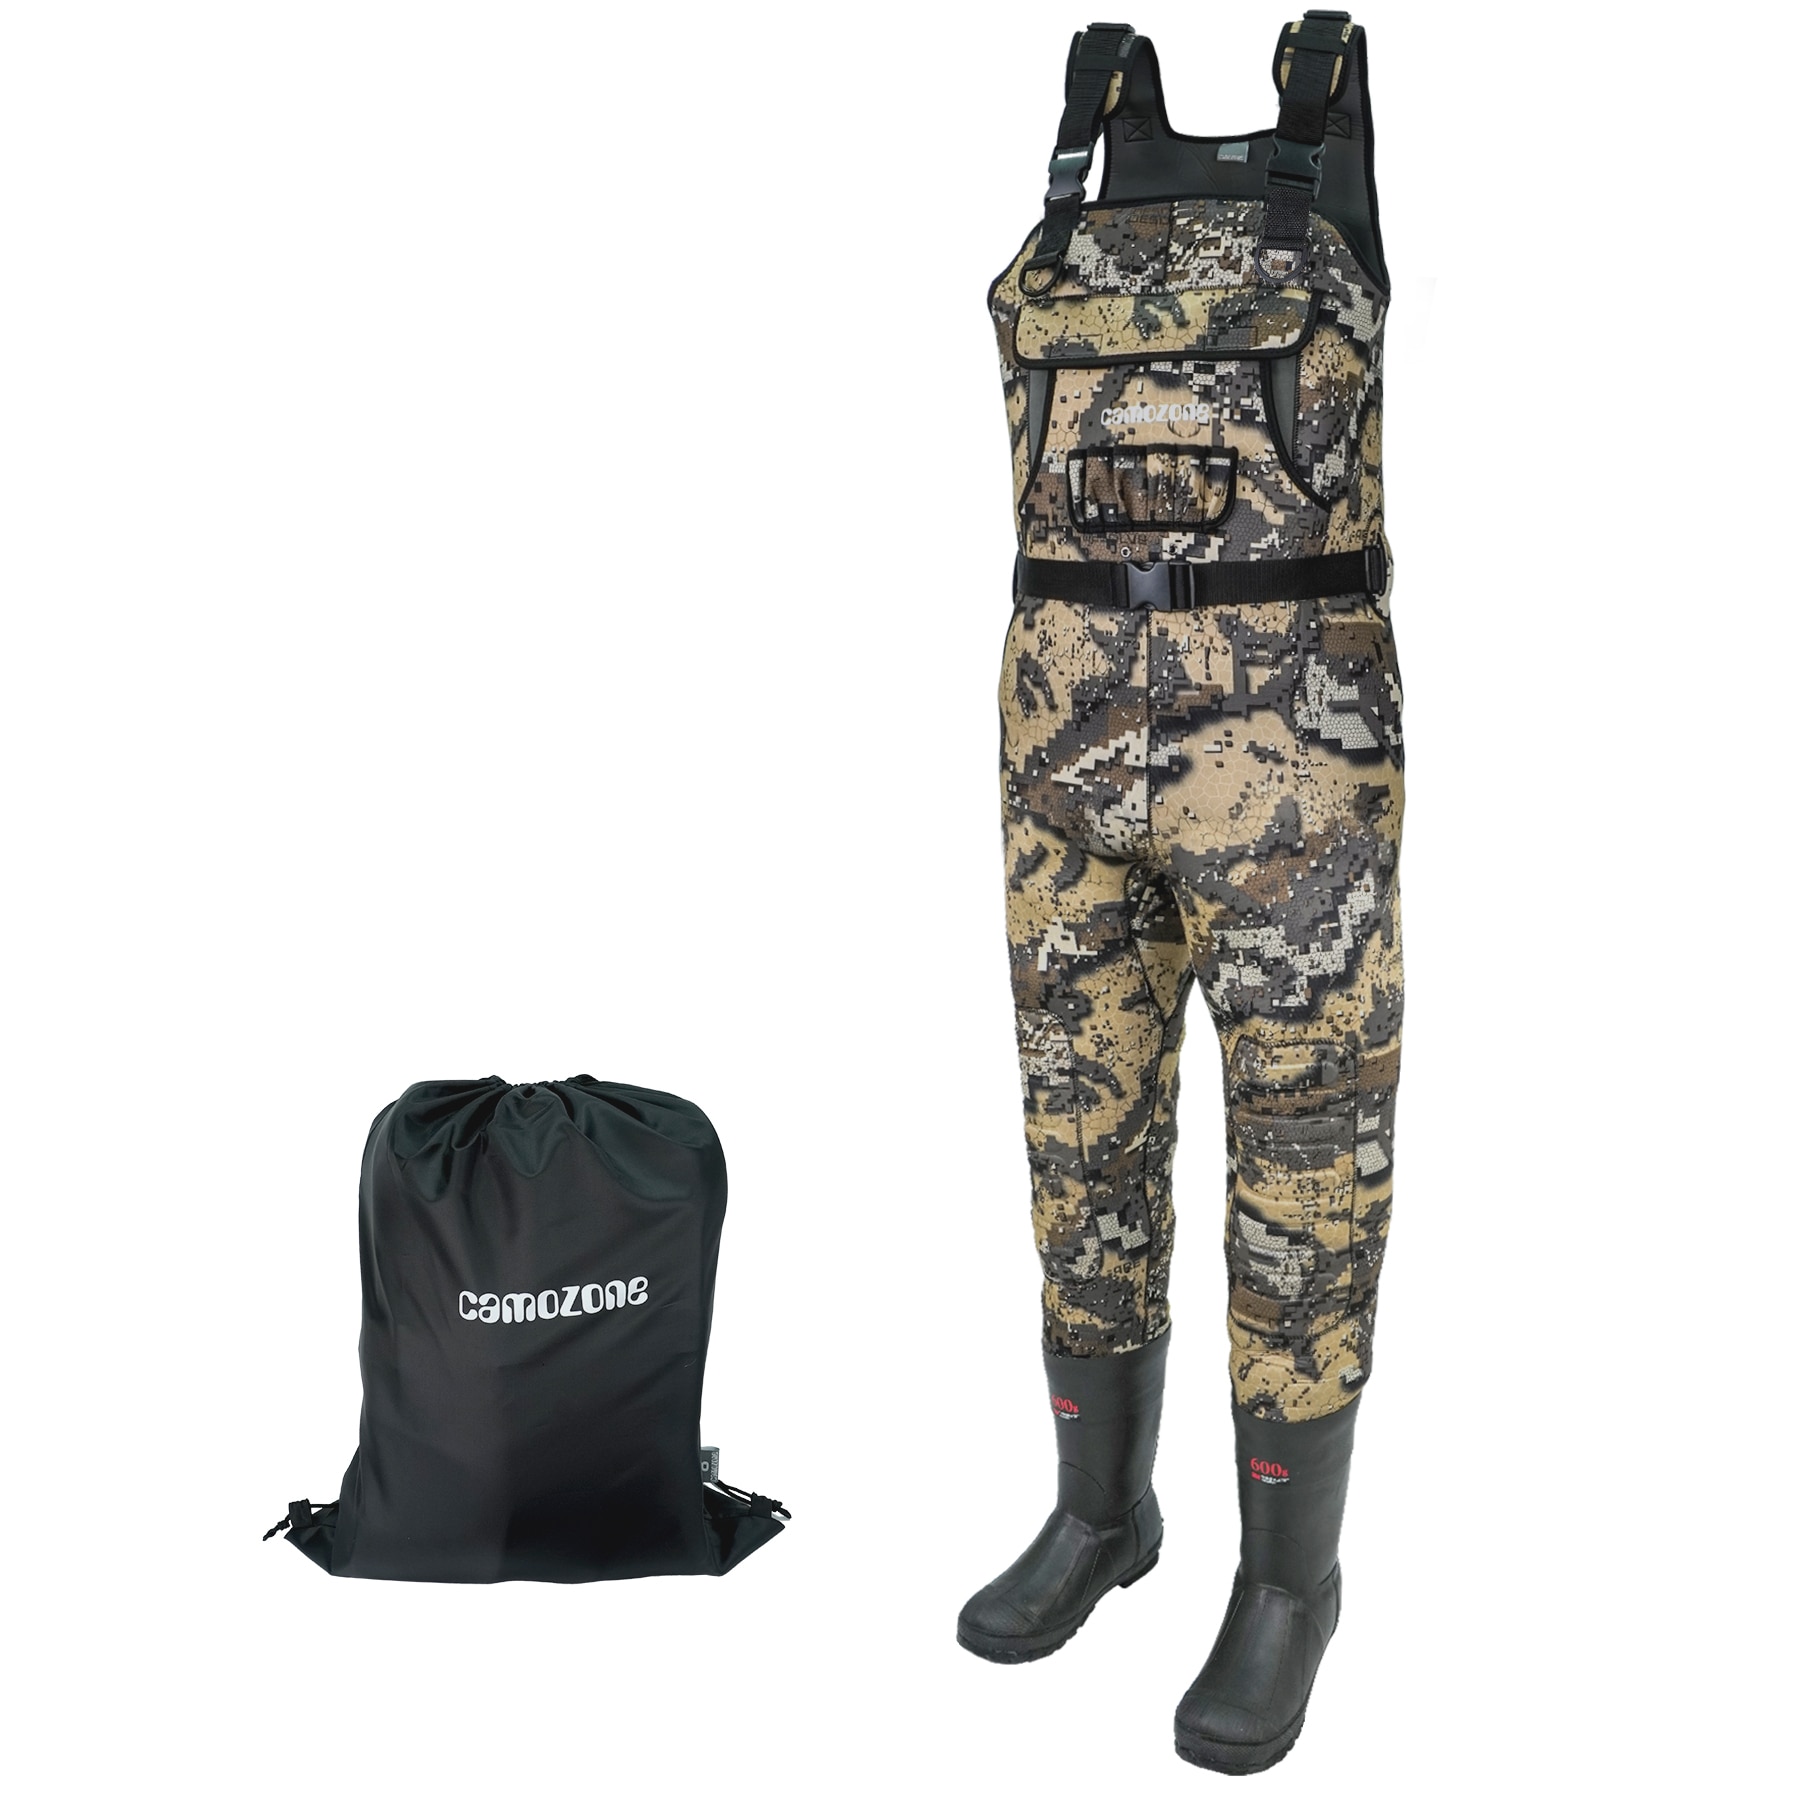 Camozone Neoprene Chest Waders with Boots Veil Camo 9 NBCW005B-9